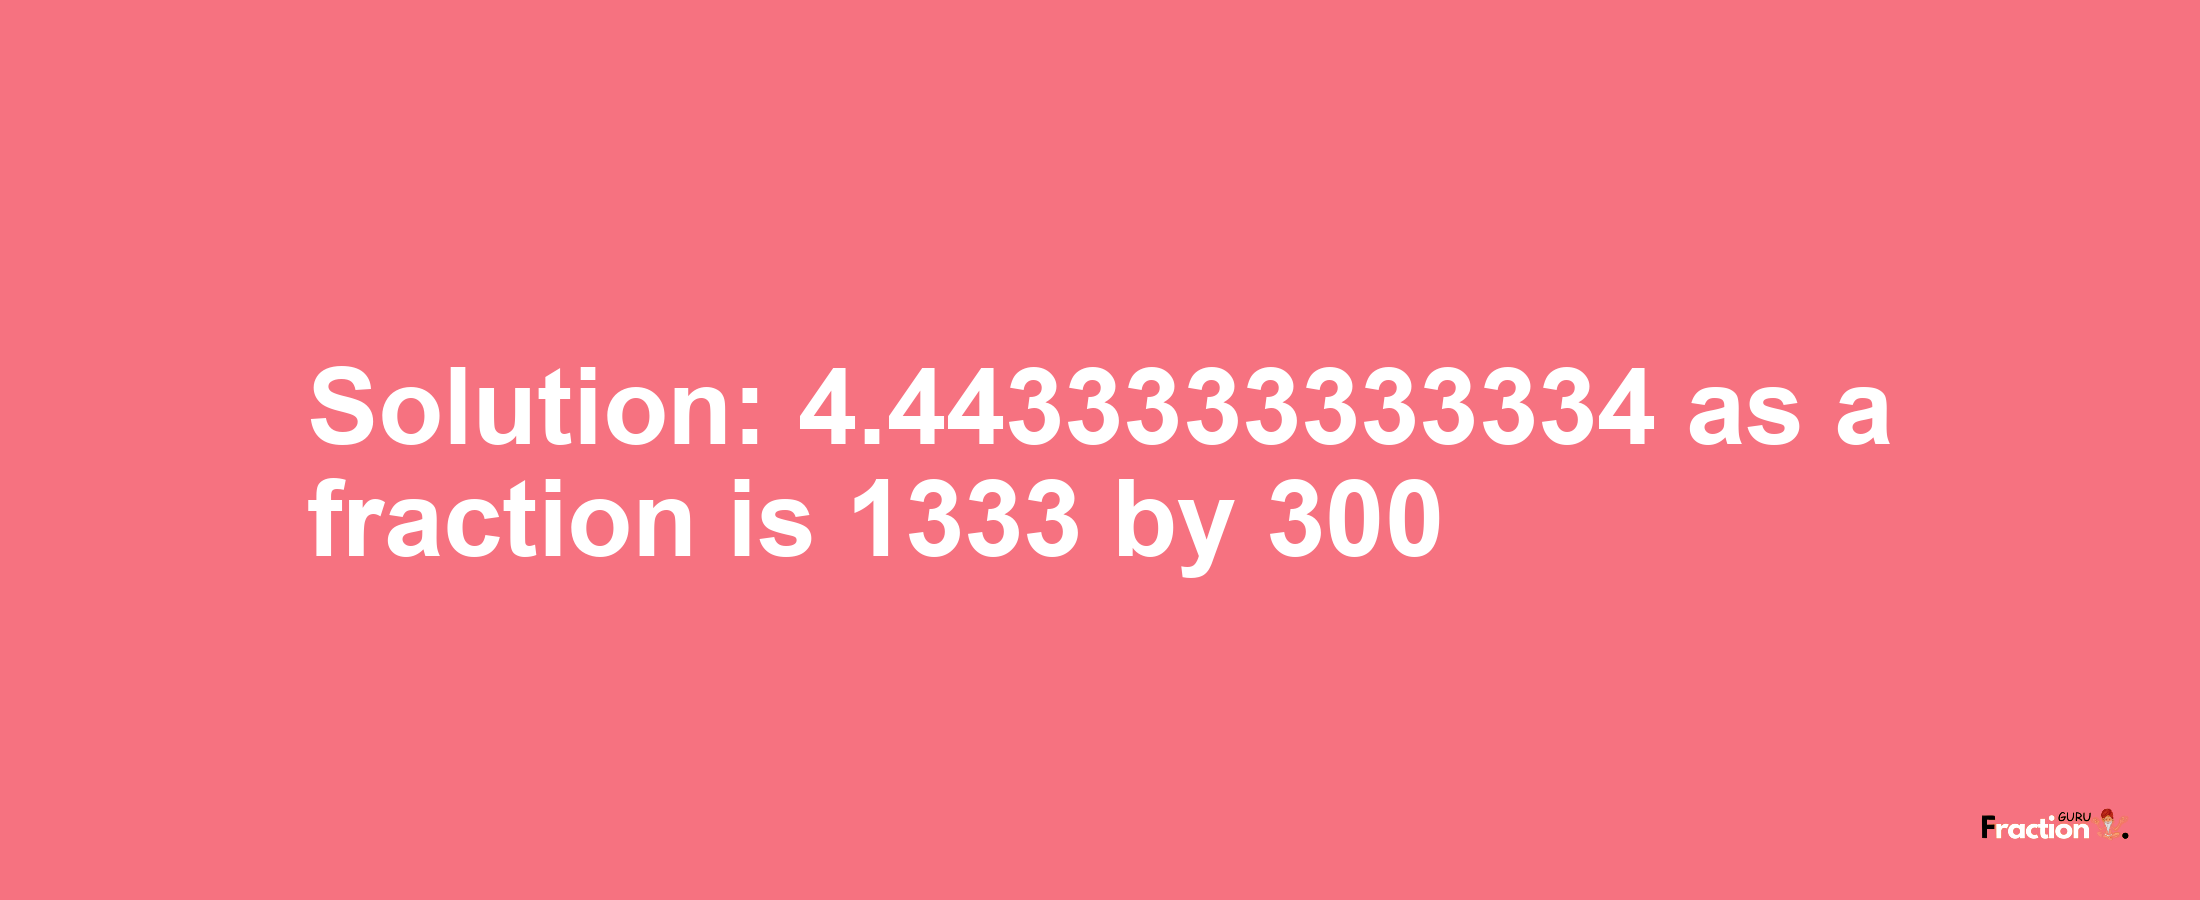 Solution:4.4433333333334 as a fraction is 1333/300